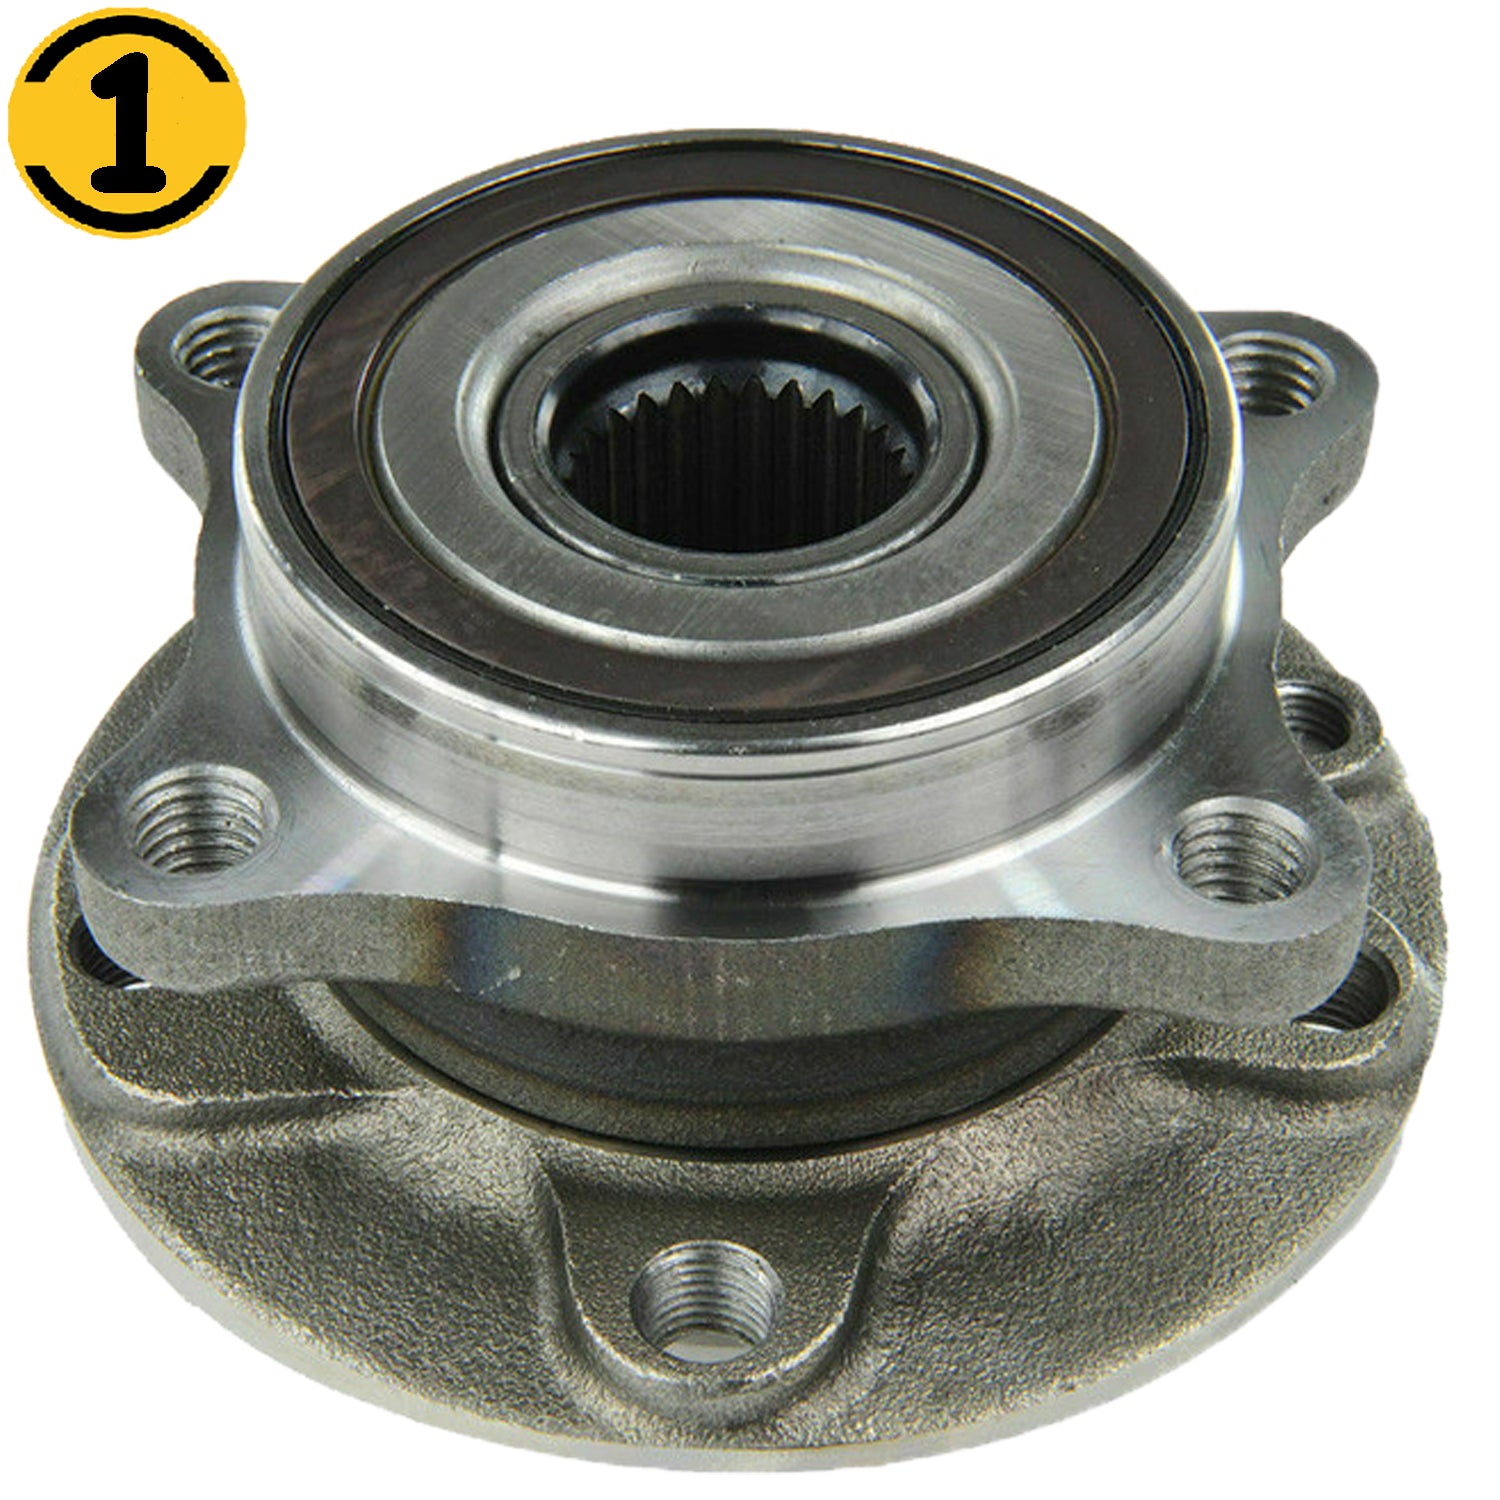 MotorbyMotor 513348 Low RUNOUT Front Wheel Bearing Hub Assembly with Innovation Technical That Gets Rid of Annoying Noise.(All Models) MotorbyMotor